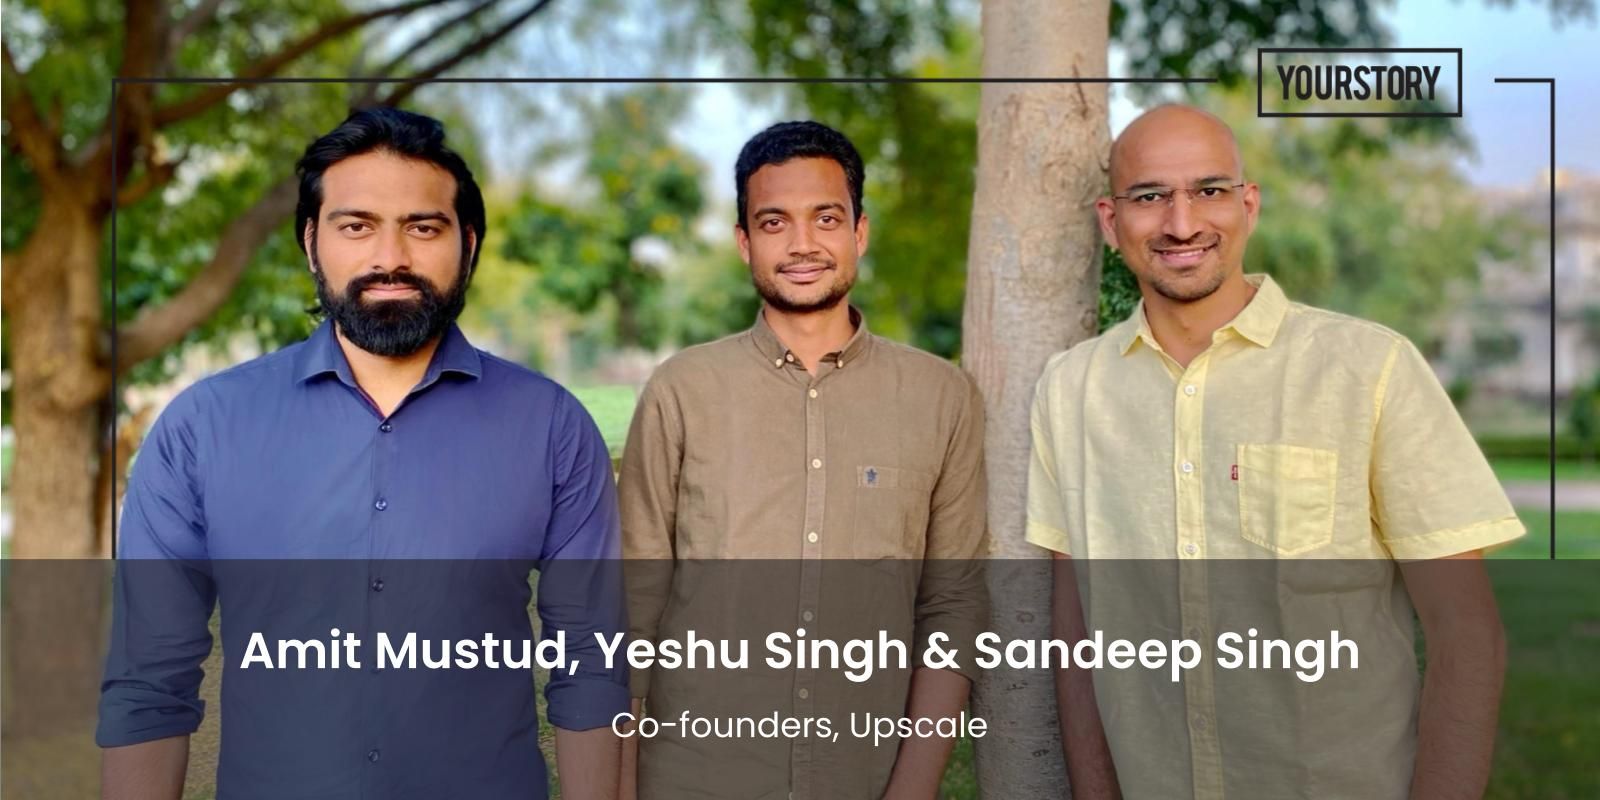 [Tech50] This sales engagement platform is eliminating ‘guesswork’ in sales prospecting with data-backed guided selling
